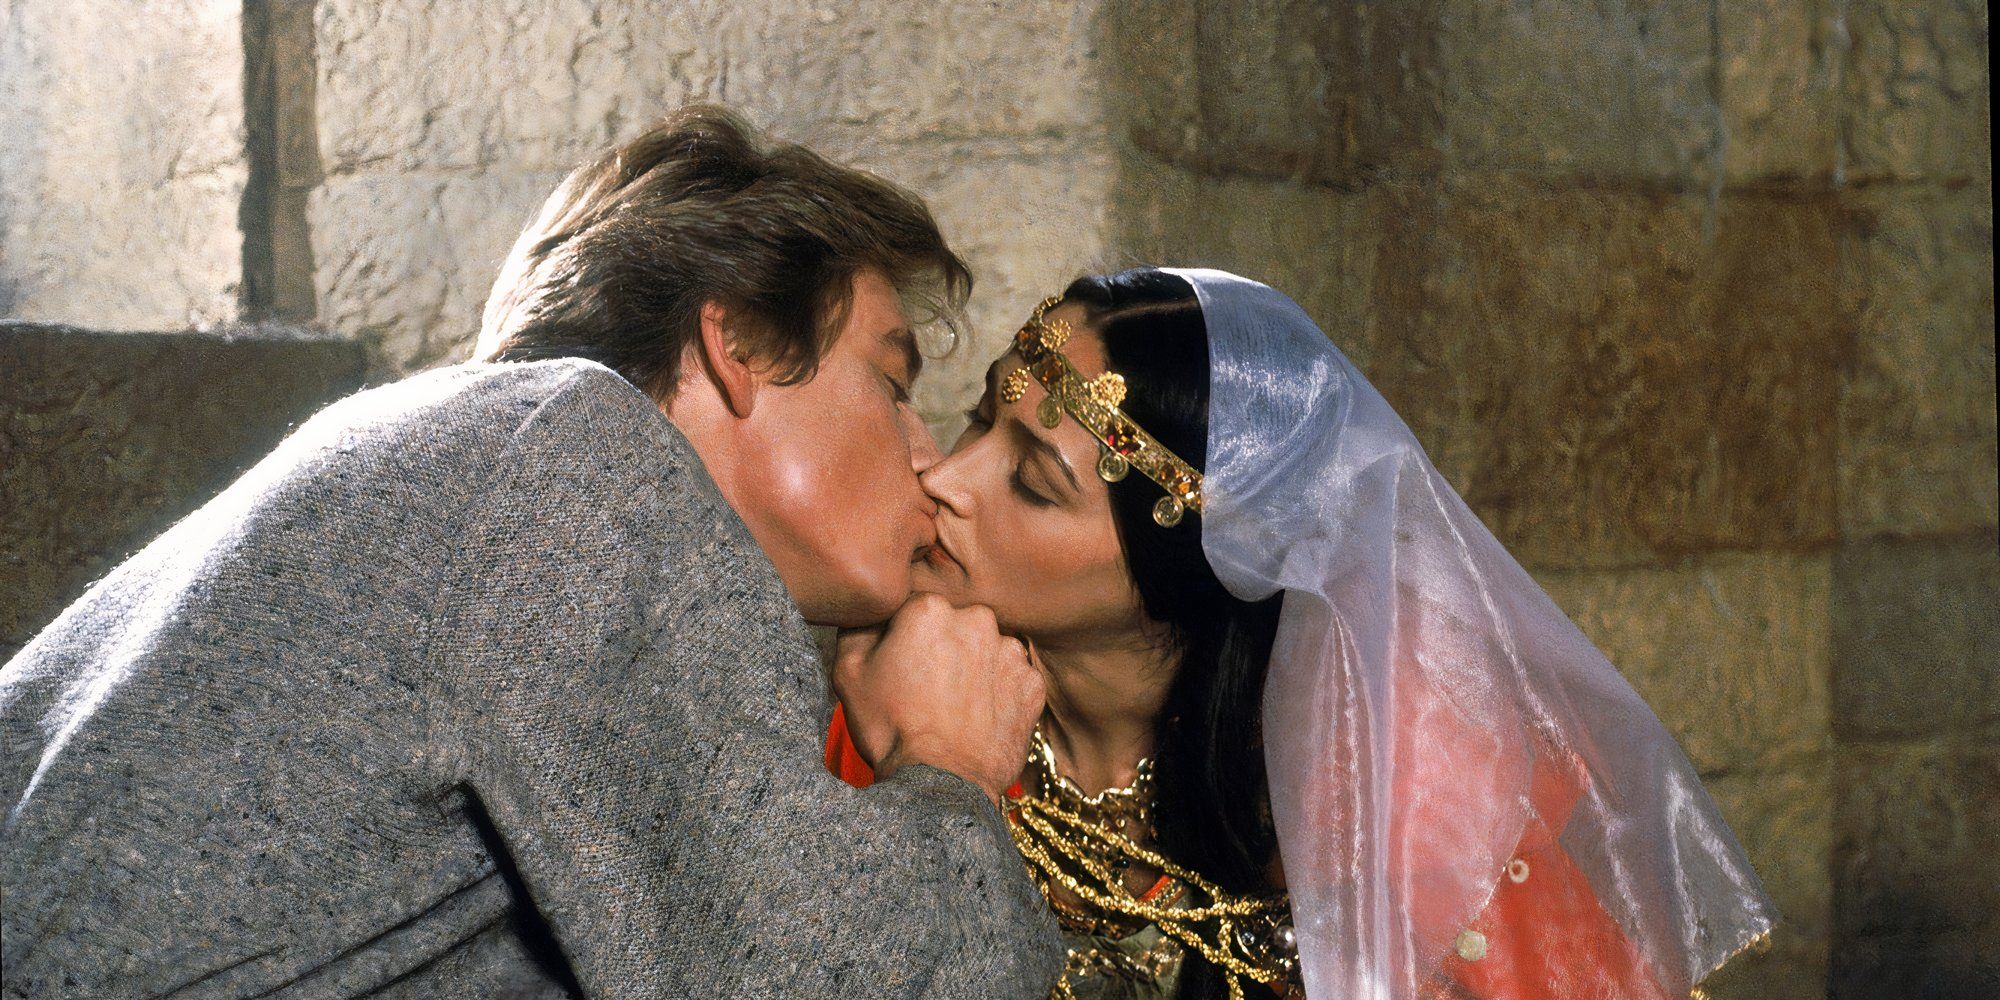 Anthony Andrews as Wilfred and Olivia Hussey as Rebecca kissing in Ivanhoe.